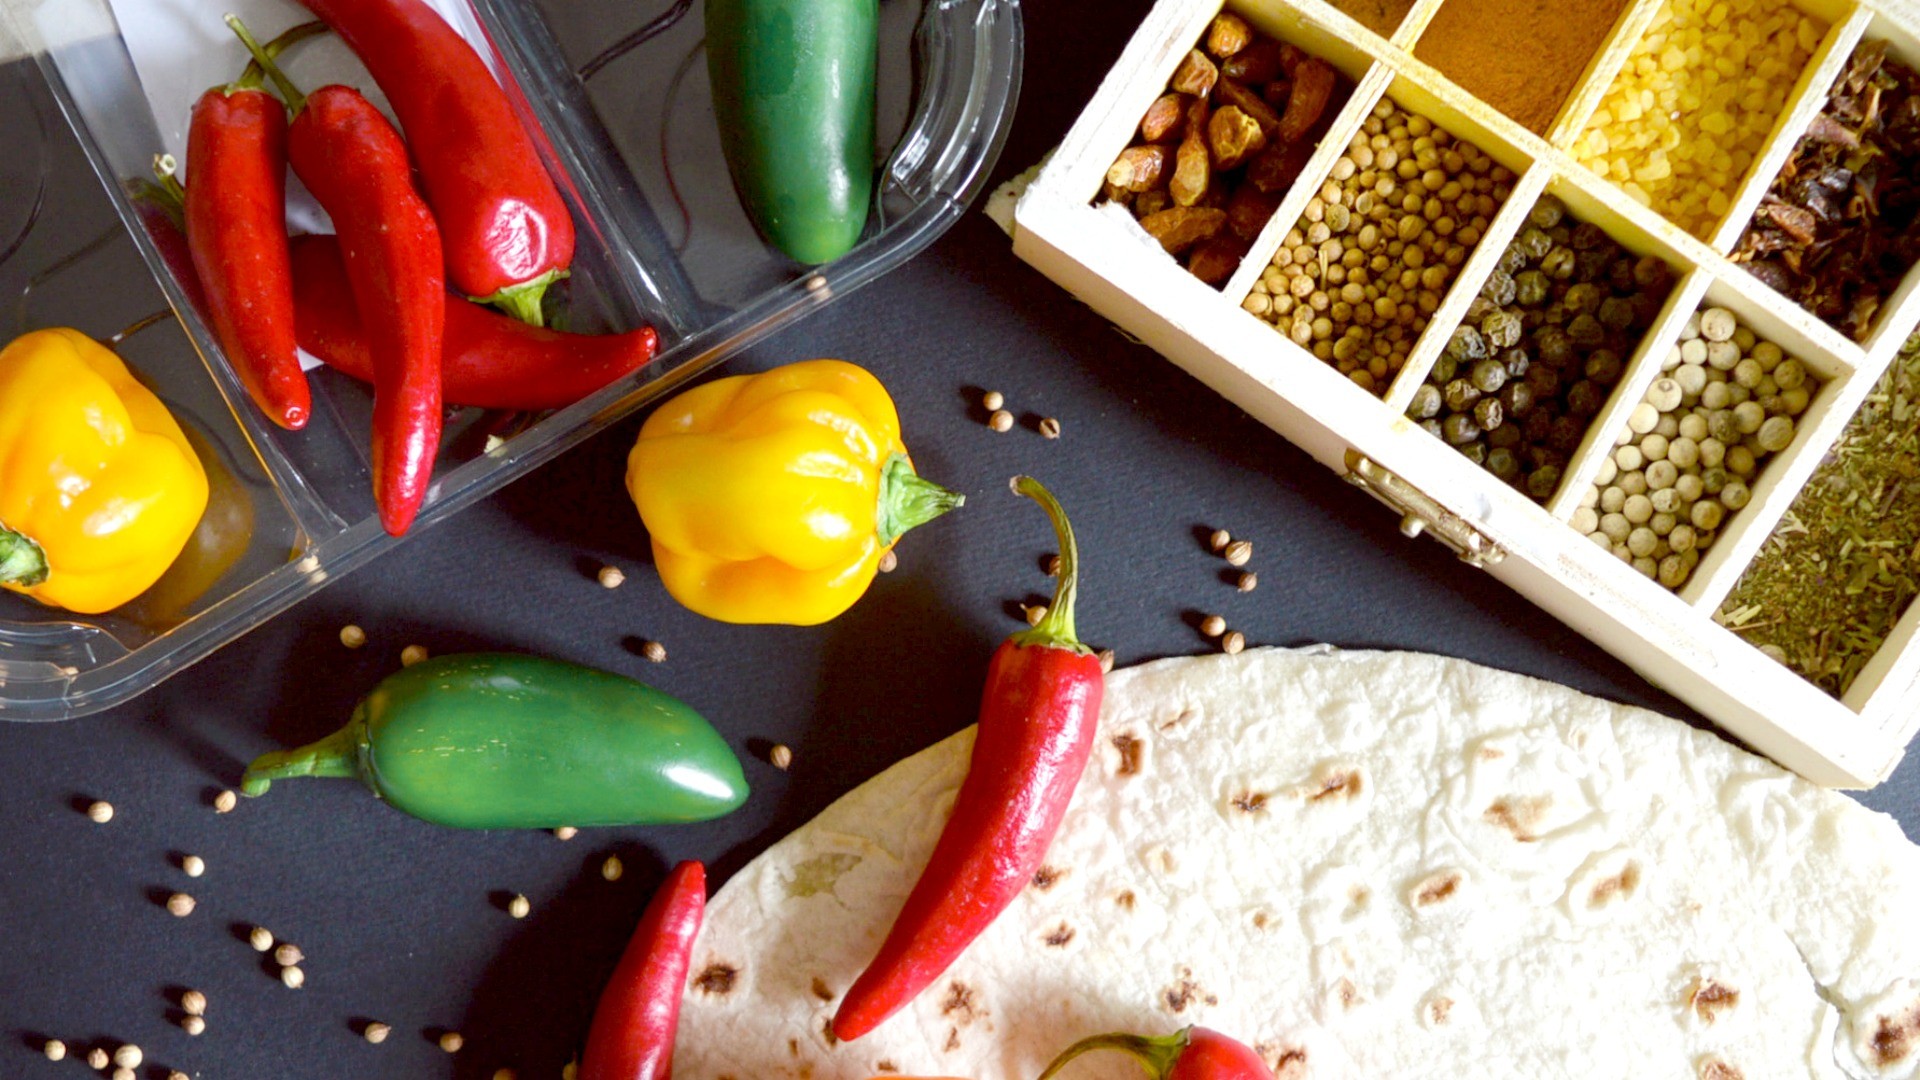 Step up your Mexican food cooking game with all the right seasonings